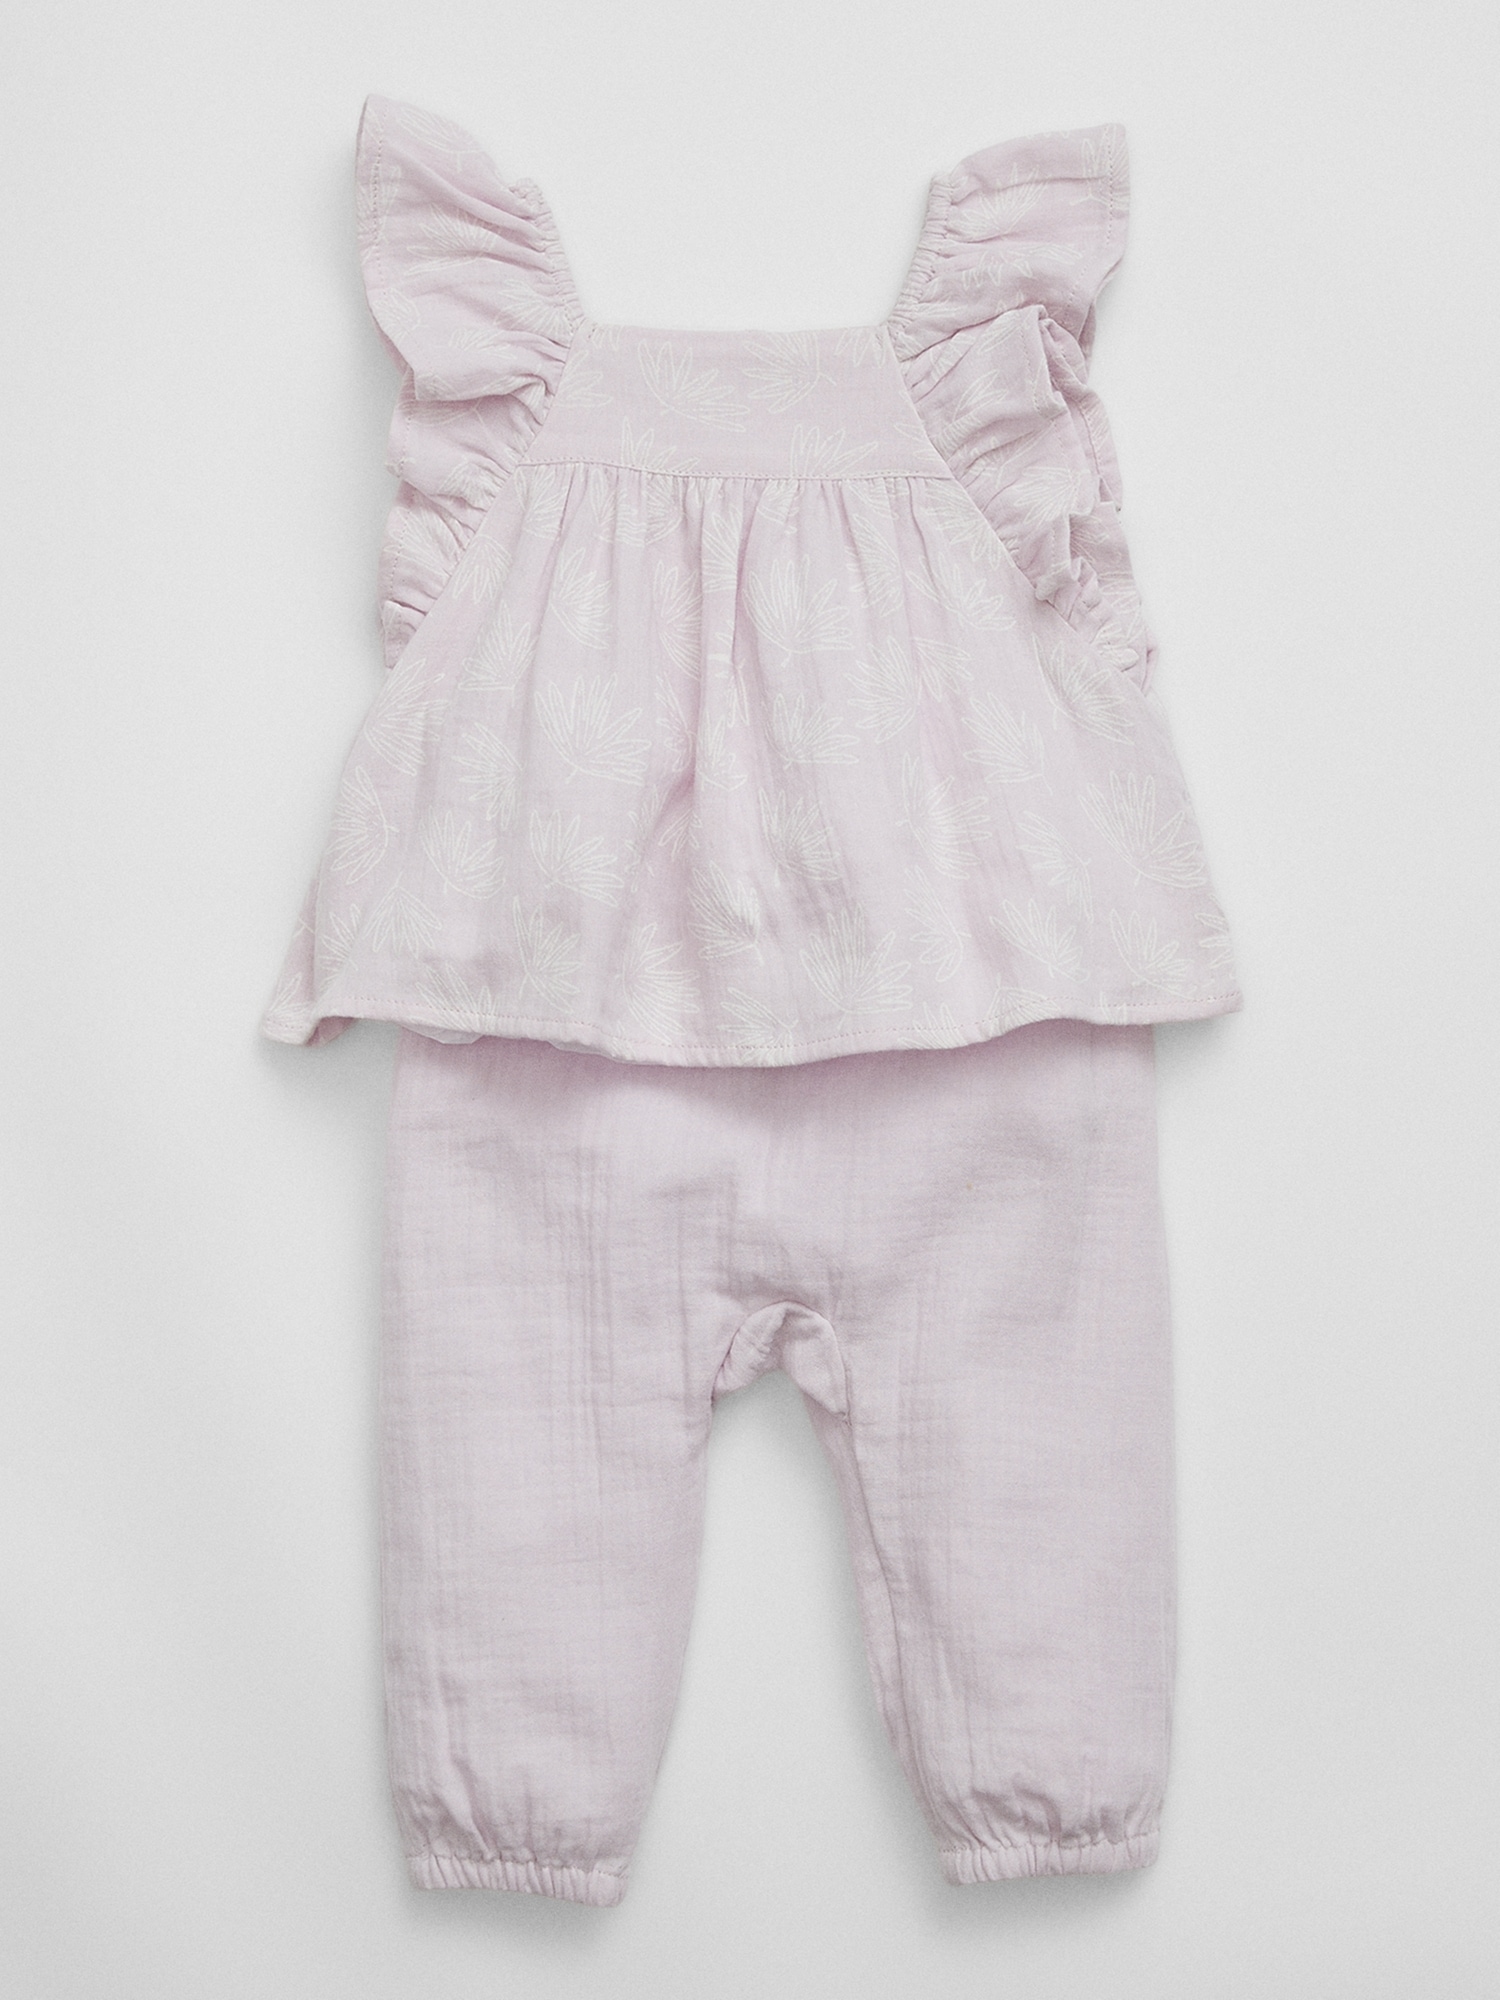 Baby Gauze Flutter Two-Piece Outfit Set | Gap Factory